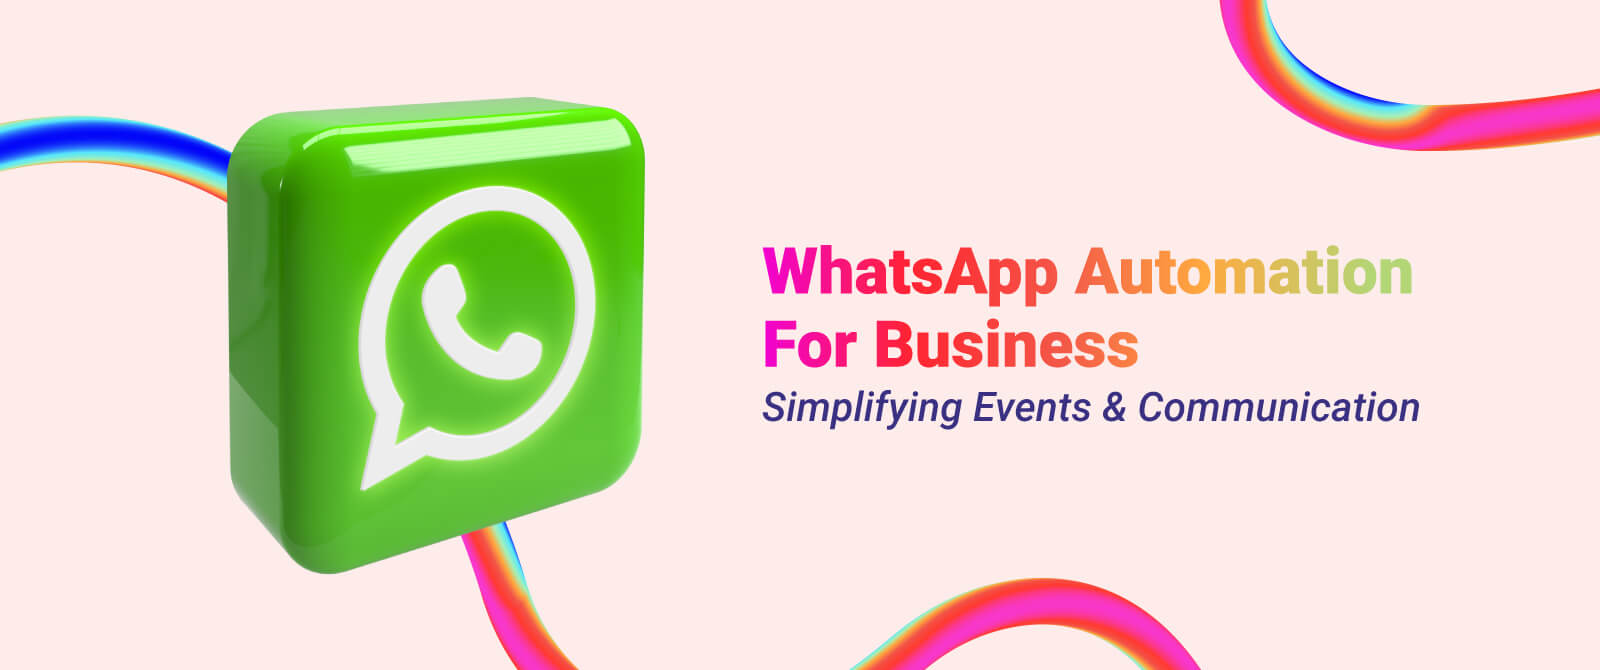 WhatsApp Automation for Business: Simplifying Events & Communication